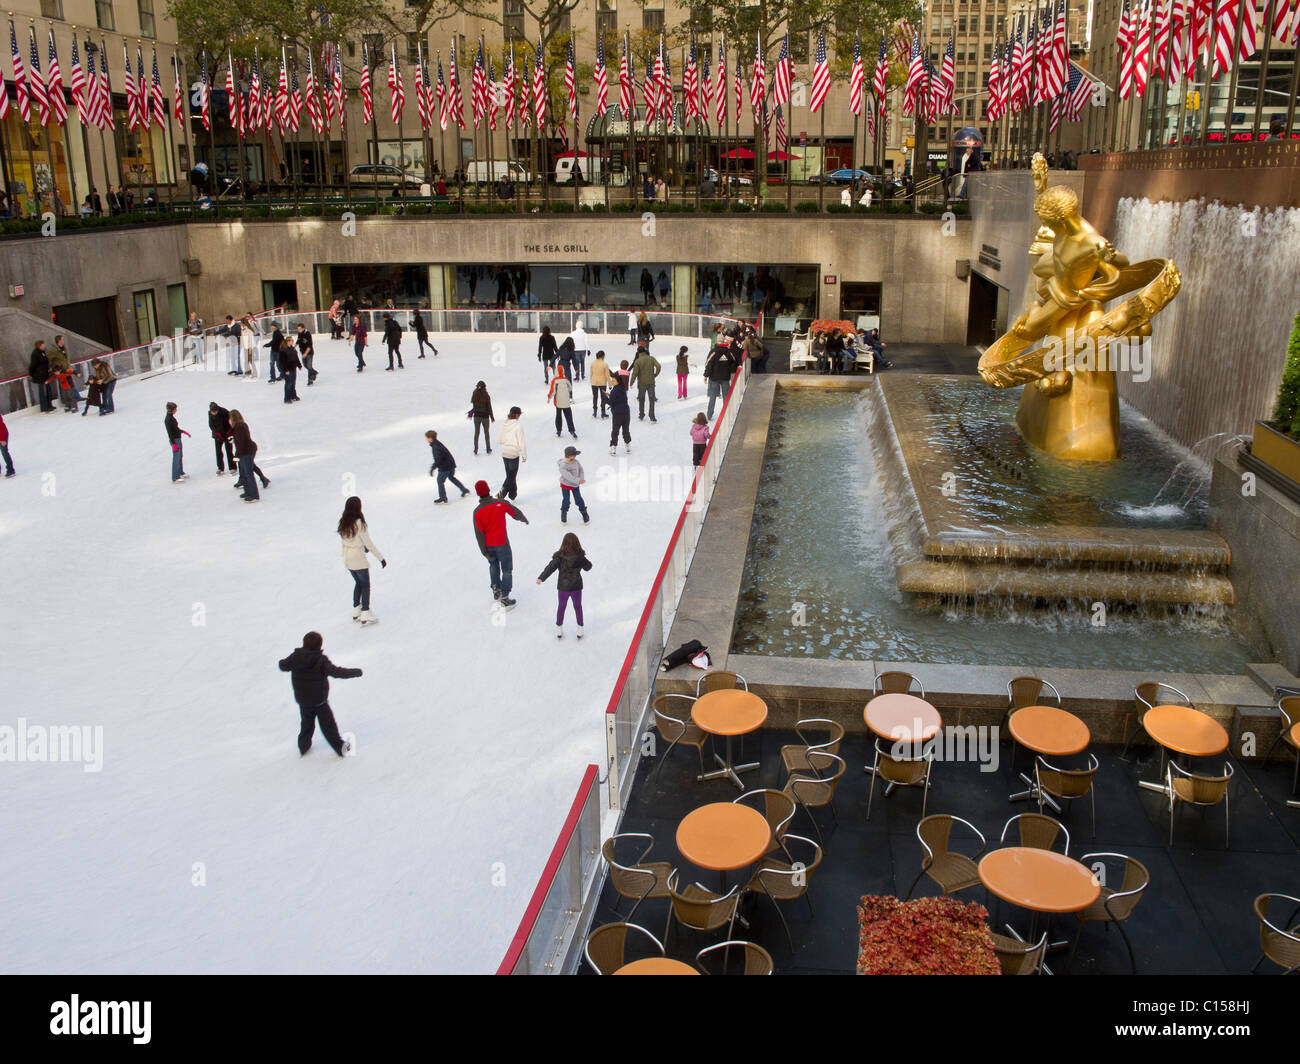 Skaters at ice rink at Rockefeller Center in mid town Manhattan. Stock Photo